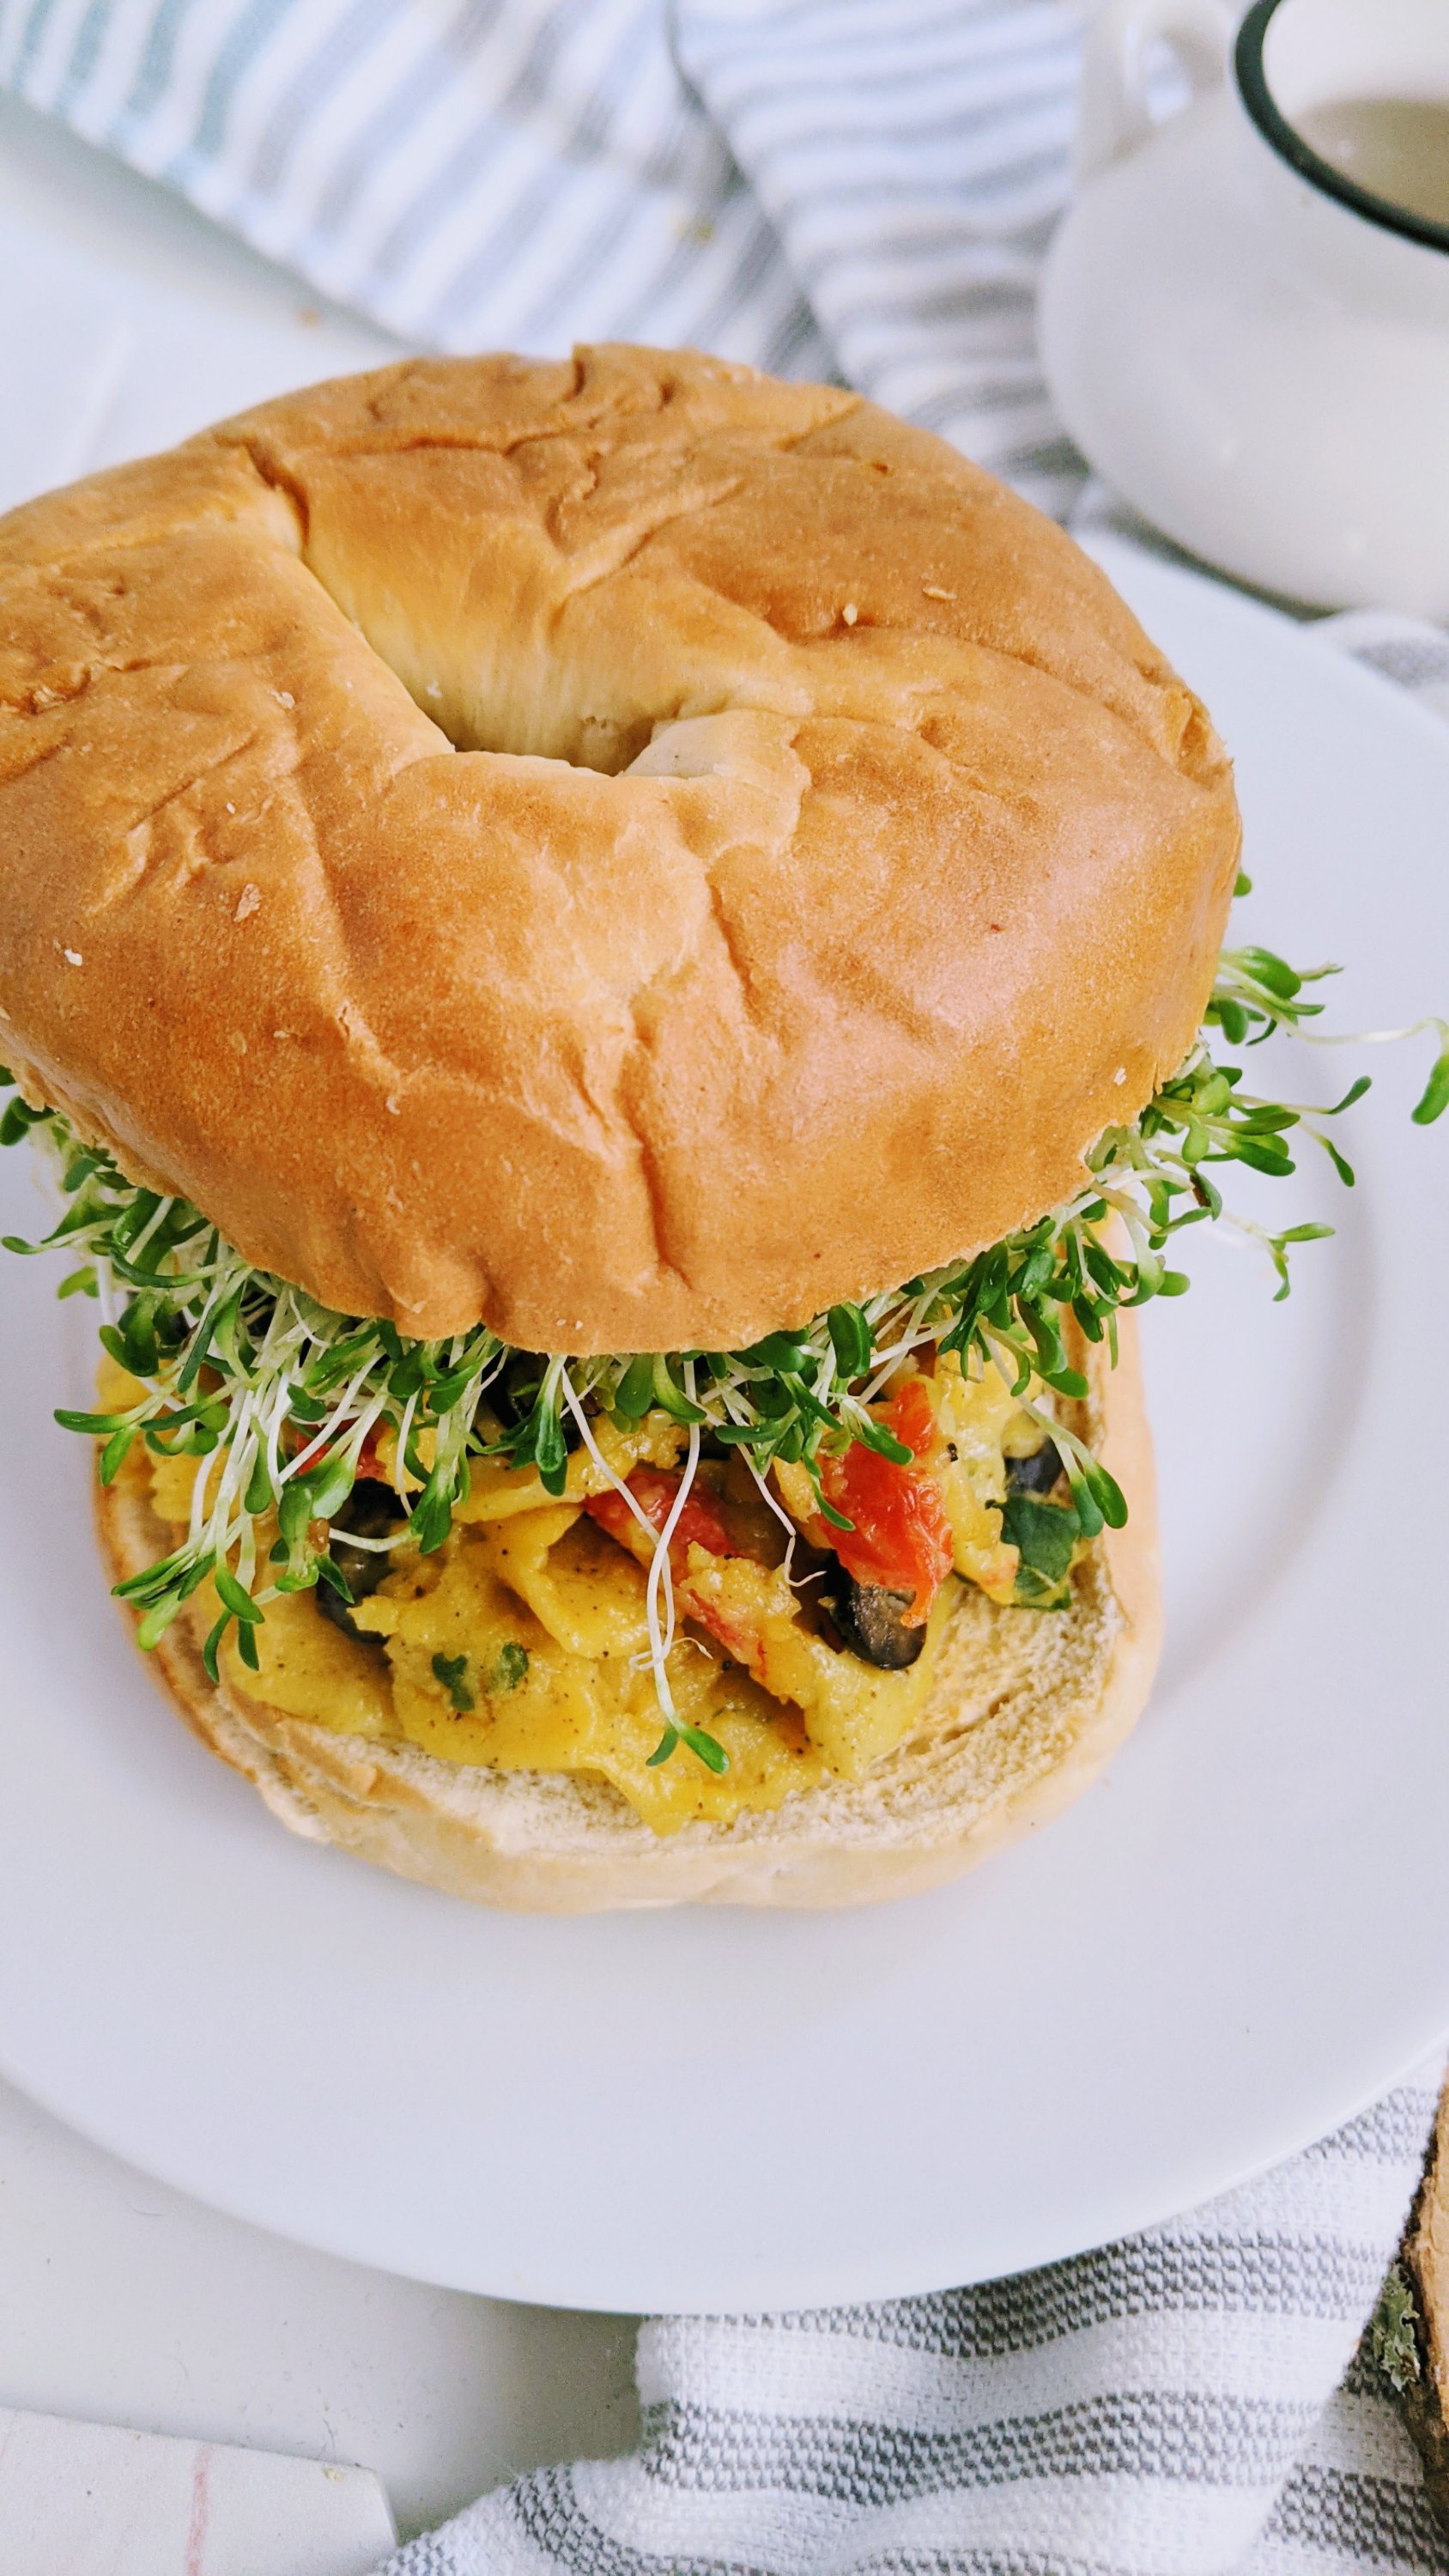 vegan breakfast sandwich with chickpeas garbanzo beans gluten free high protein breakfasts vegan plant based chickpea flour omelette sandwich recipe with sprouts healthy breakfasts